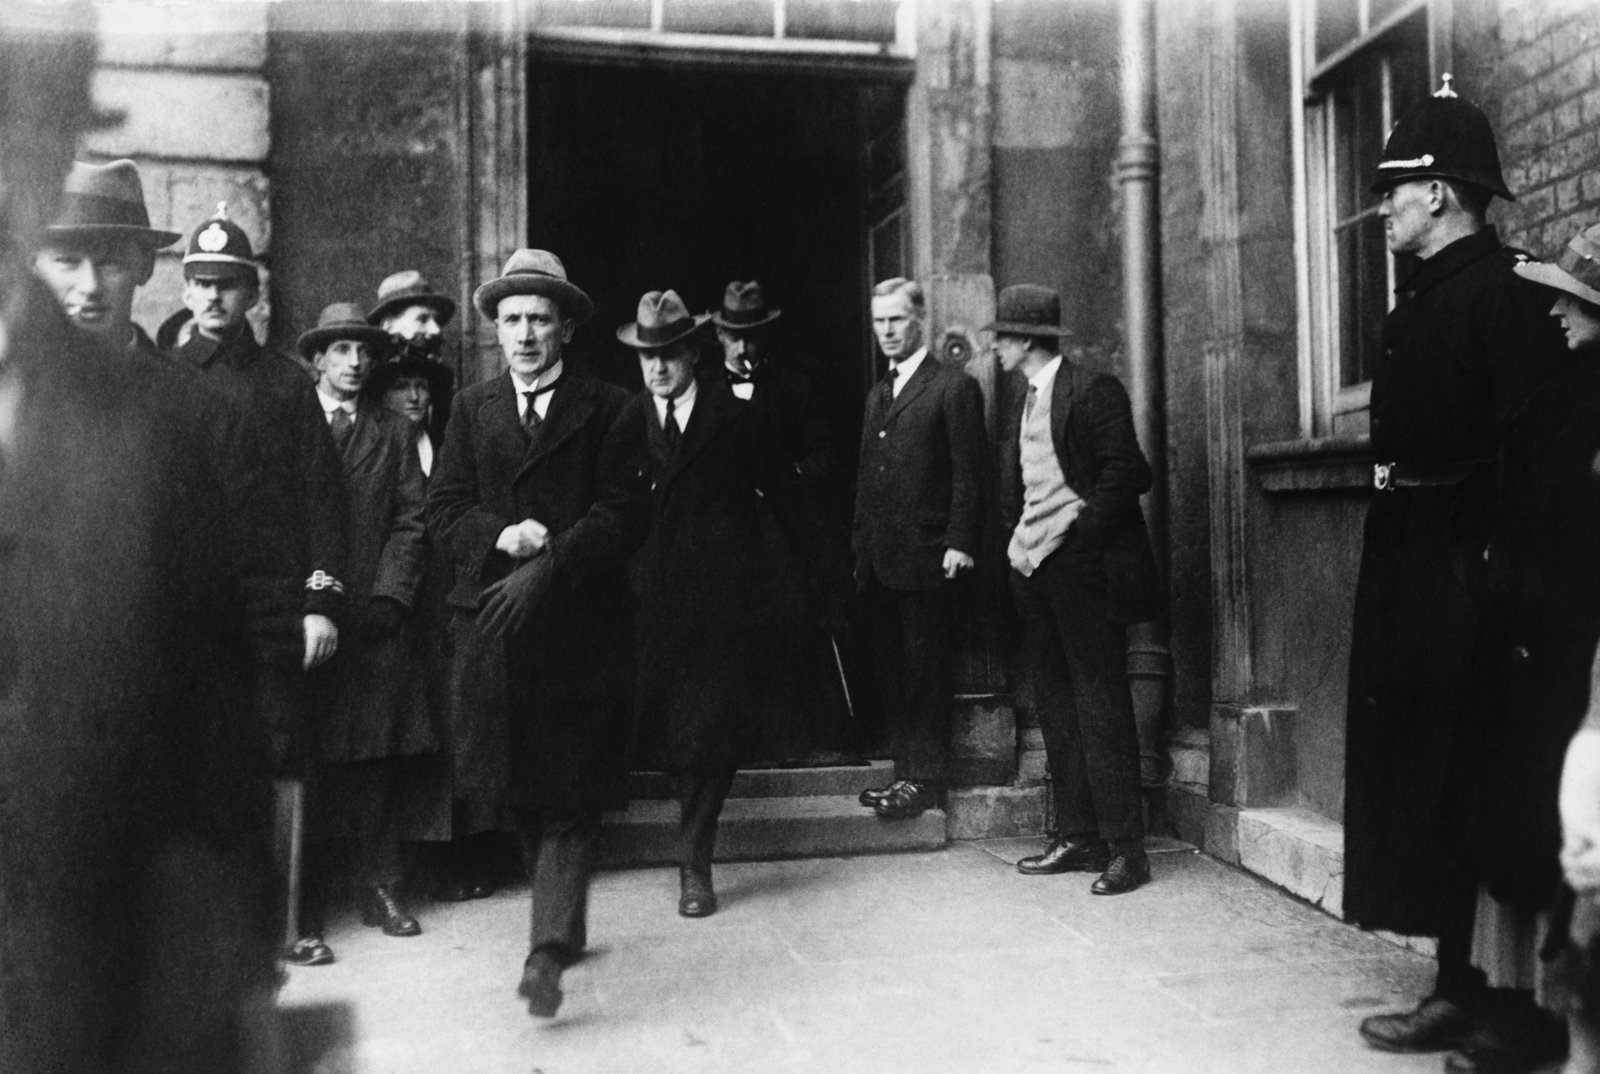 Image - Michael Collins (centre) and Kevin O'Higgins (putting on glove) arriving at Dublin Castle for the formal transfer of power. Photo: © Hulton-Deutsch Collection/CORBIS/Corbis via Getty Images